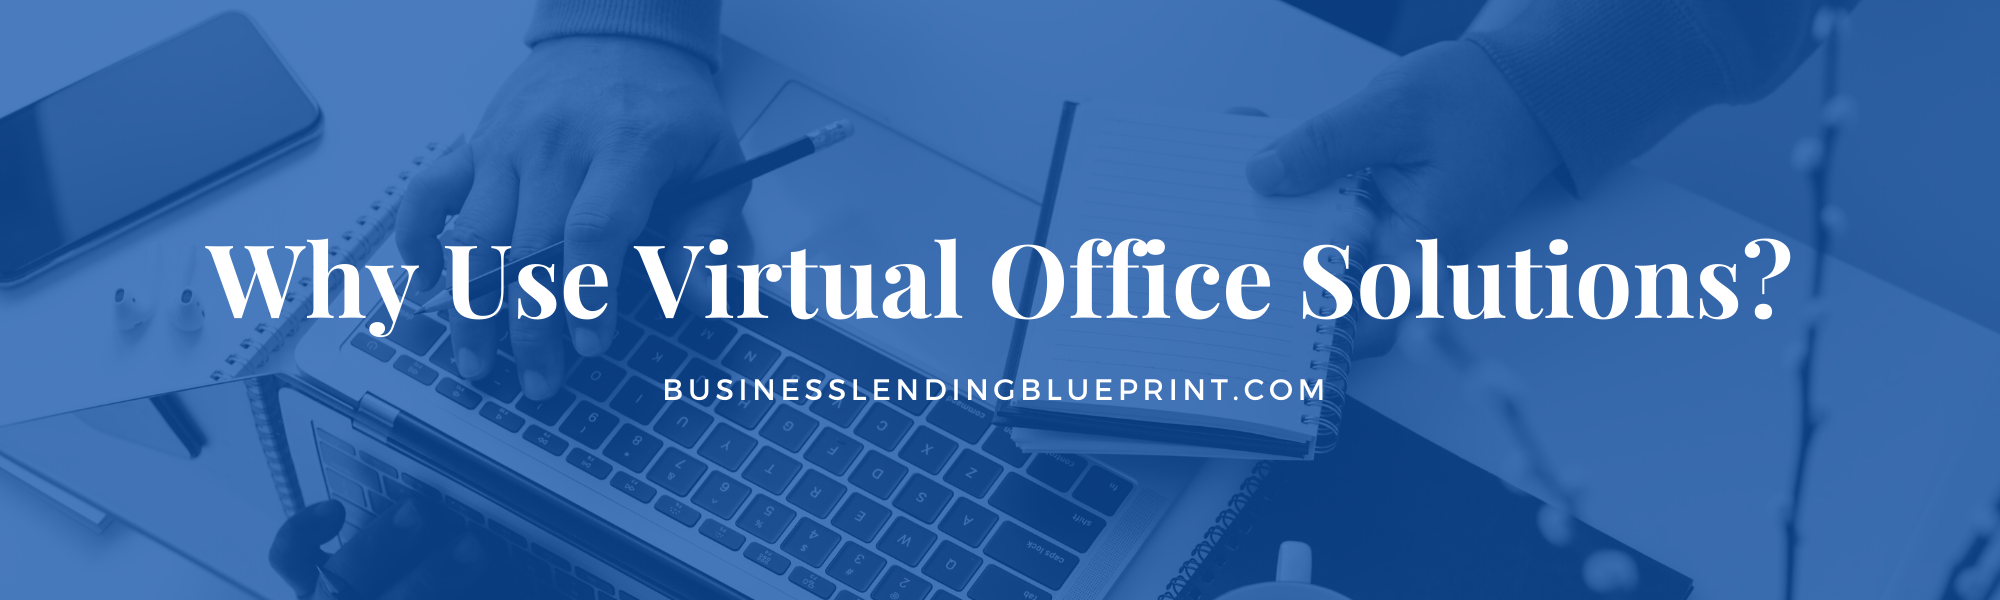 Why Use Virtual Office Solutions graphic